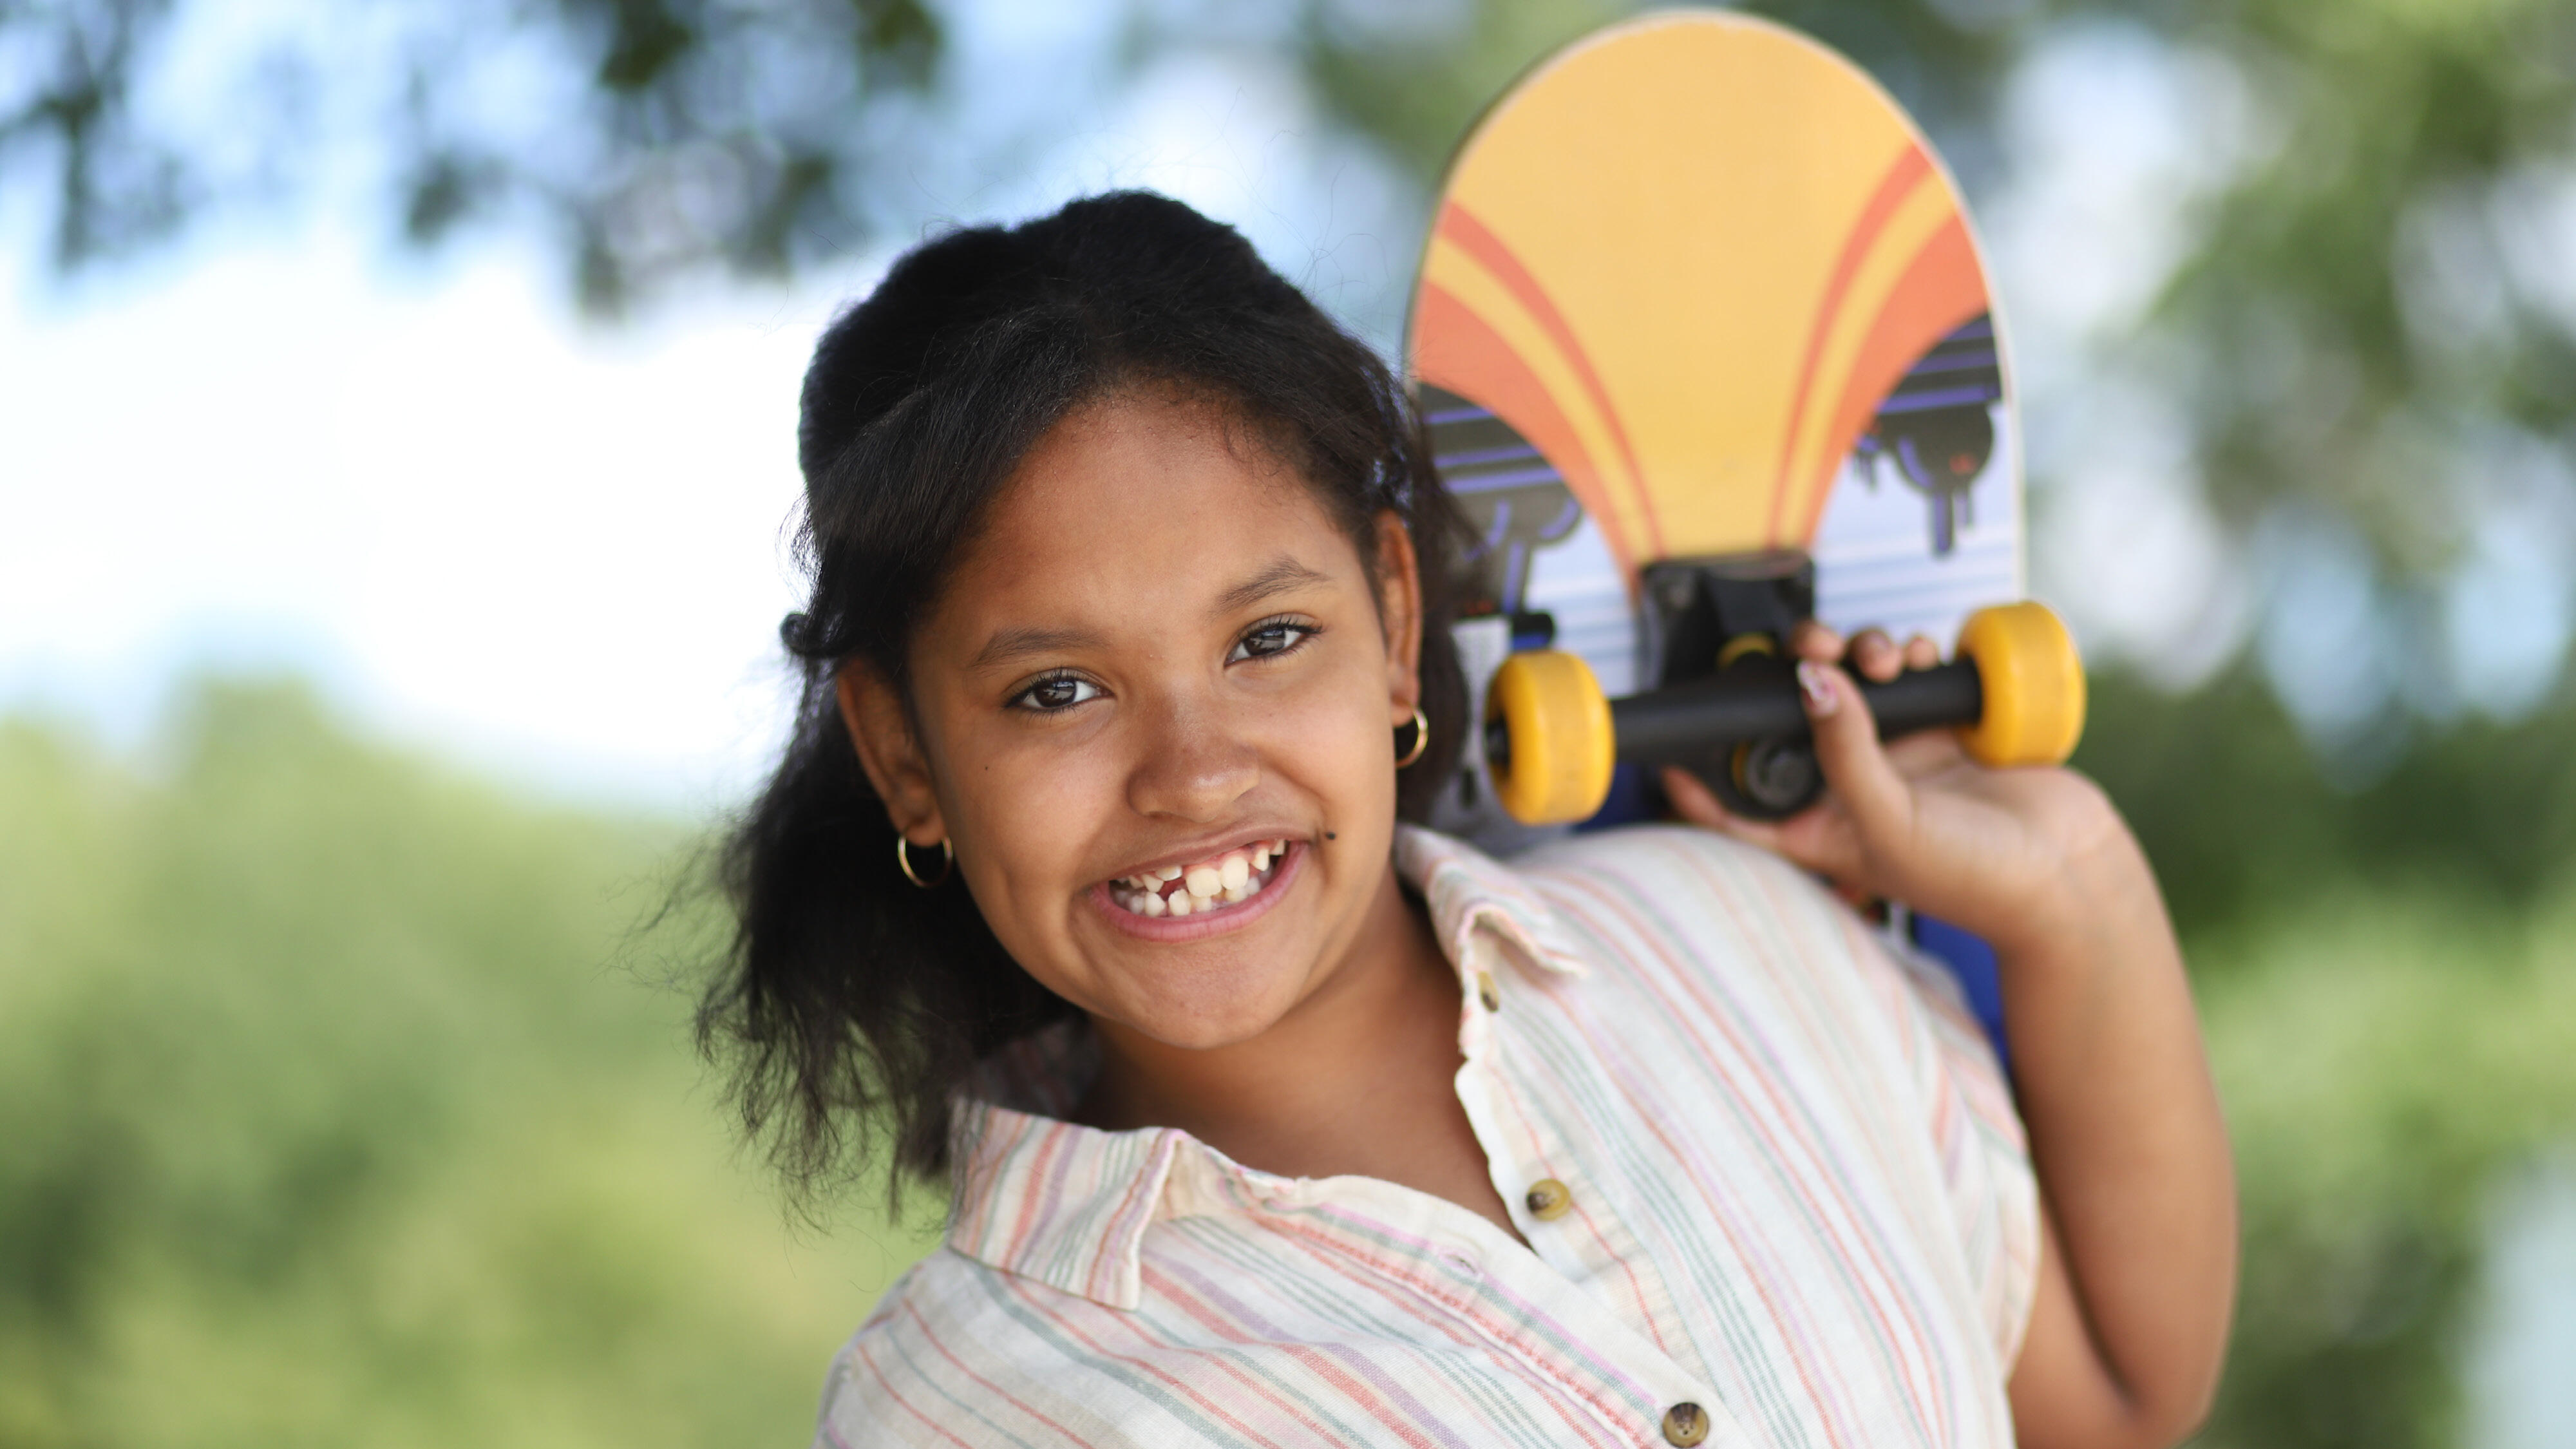 Student smiling while holding a skateboard